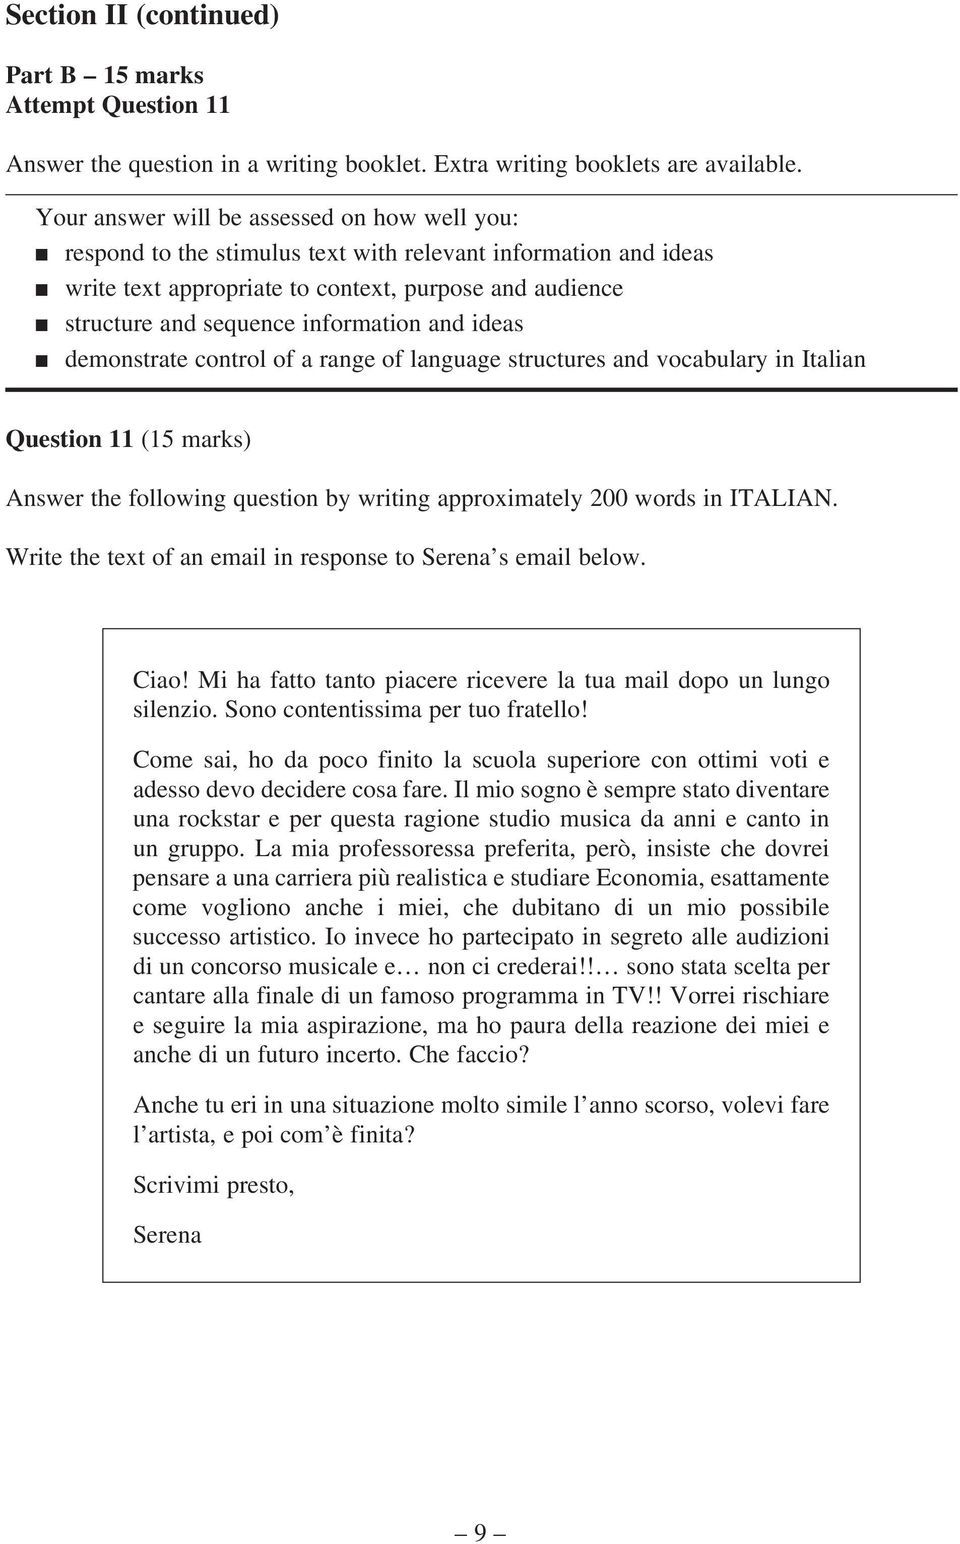 information and ideas n demonstrate control of a range of language structures and vocabulary in Italian Question 11 (15 marks) Answer the following question by writing approximately 200 words in